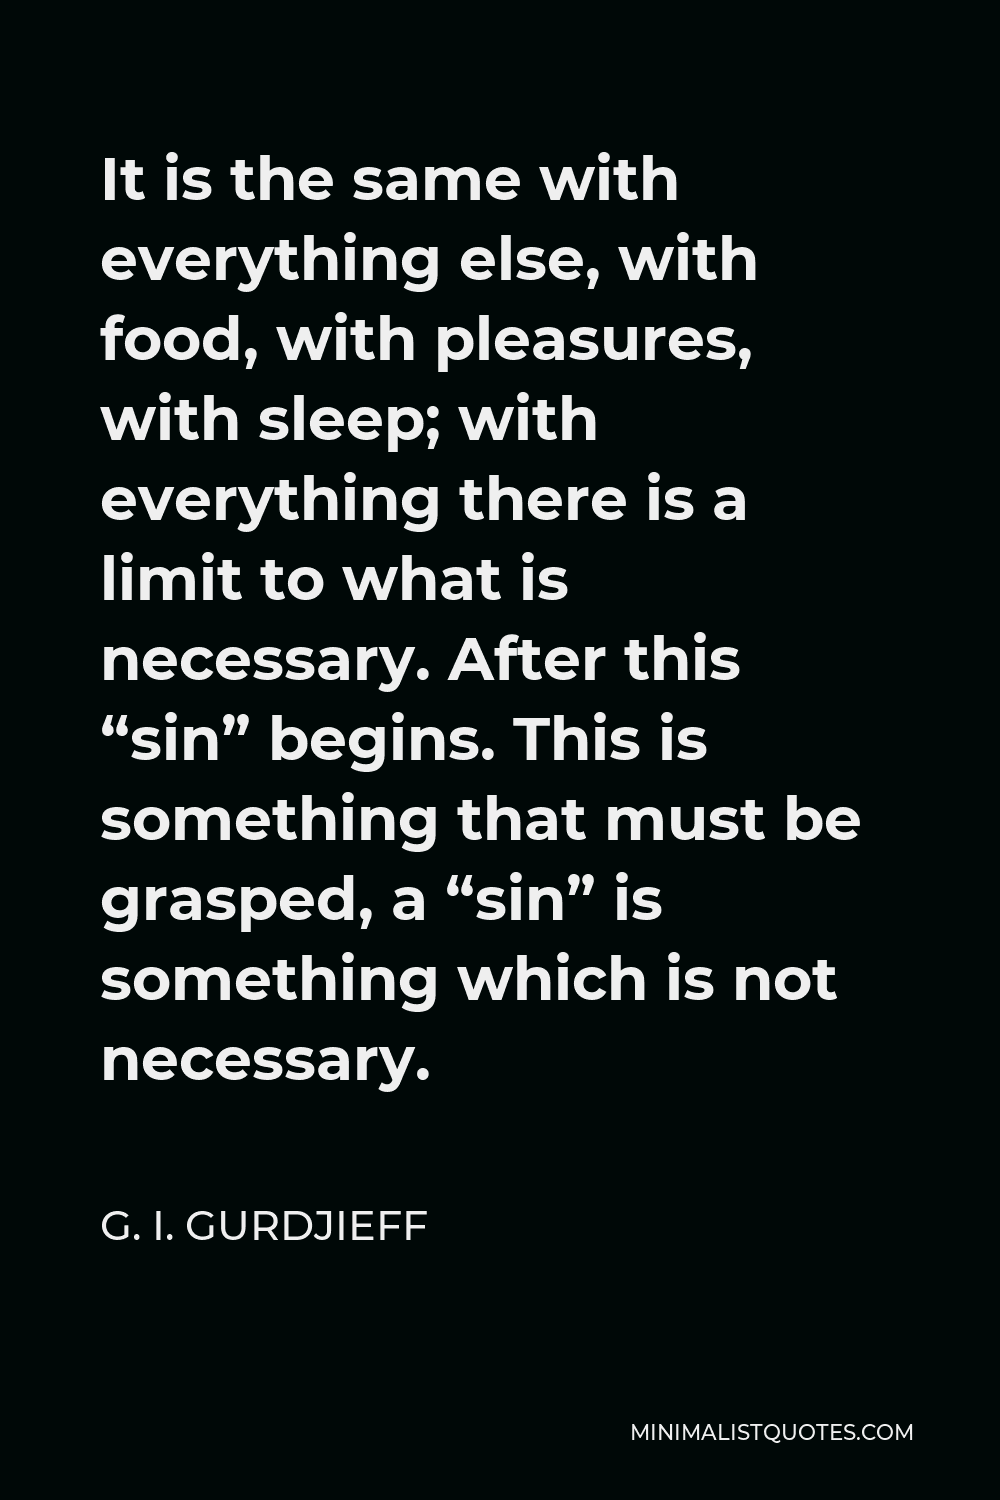 G. I. Gurdjieff Quote - It is the same with everything else, with food, with pleasures, with sleep; with everything there is a limit to what is necessary. After this “sin” begins. This is something that must be grasped, a “sin” is something which is not necessary.